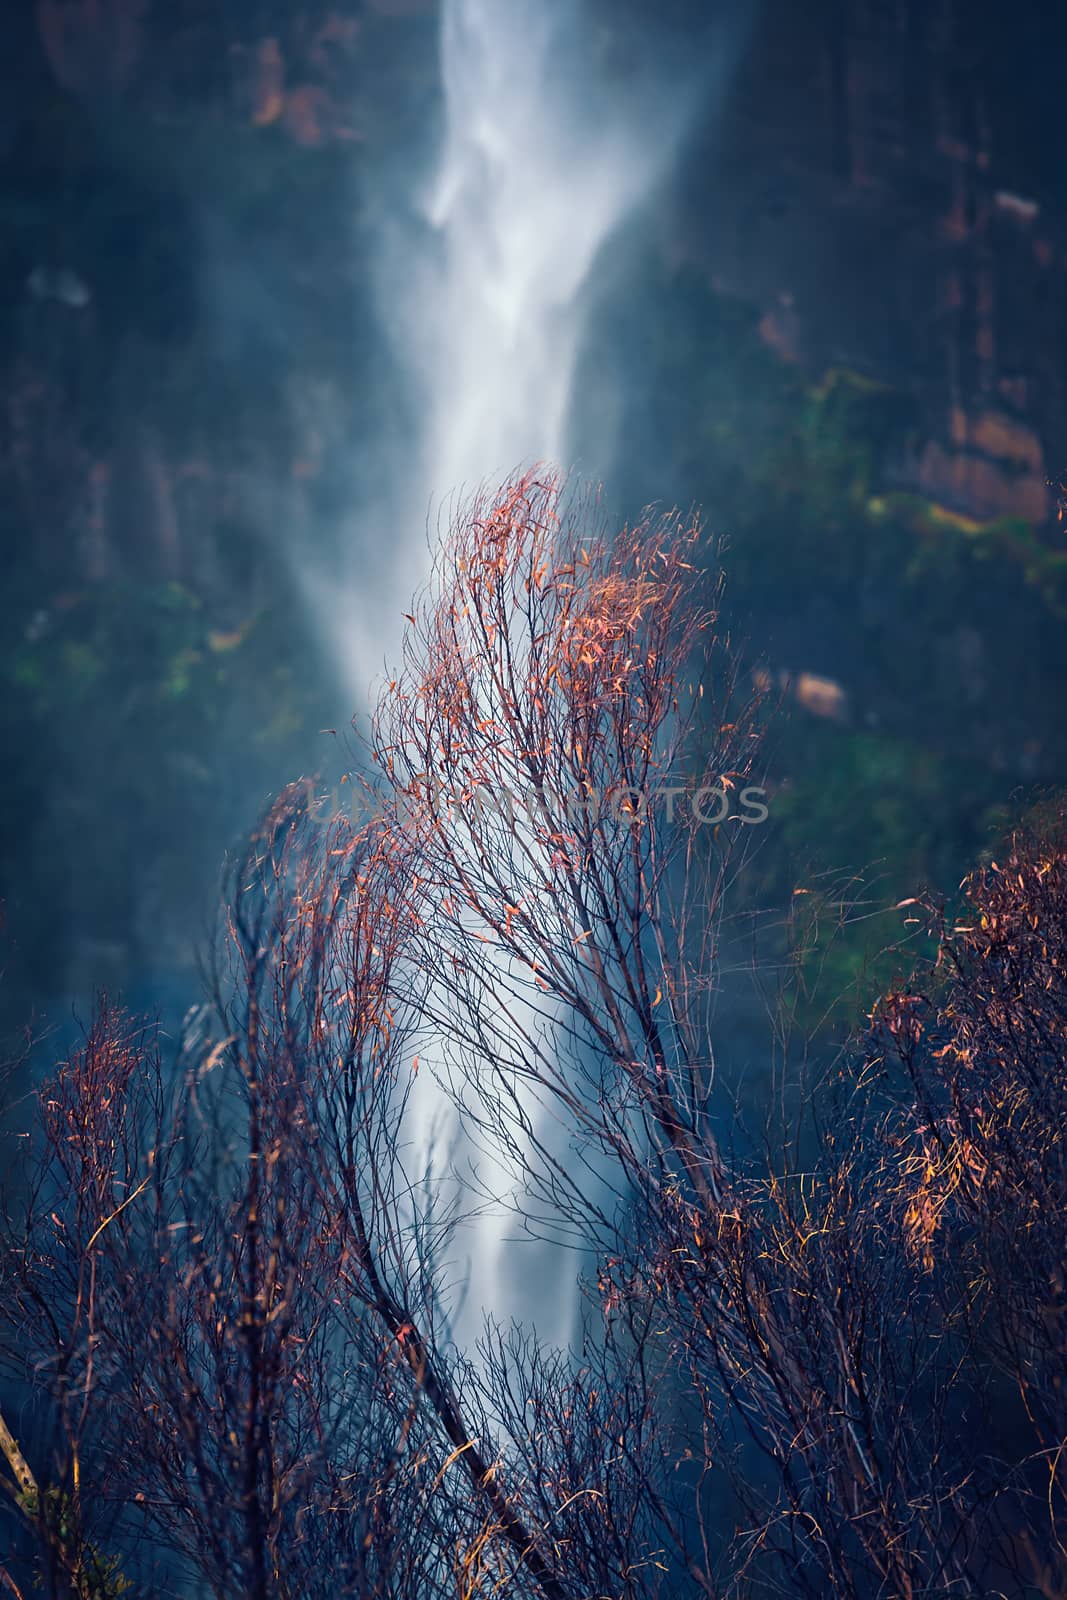 After the bush fires comes rain in  Australia by lovleah